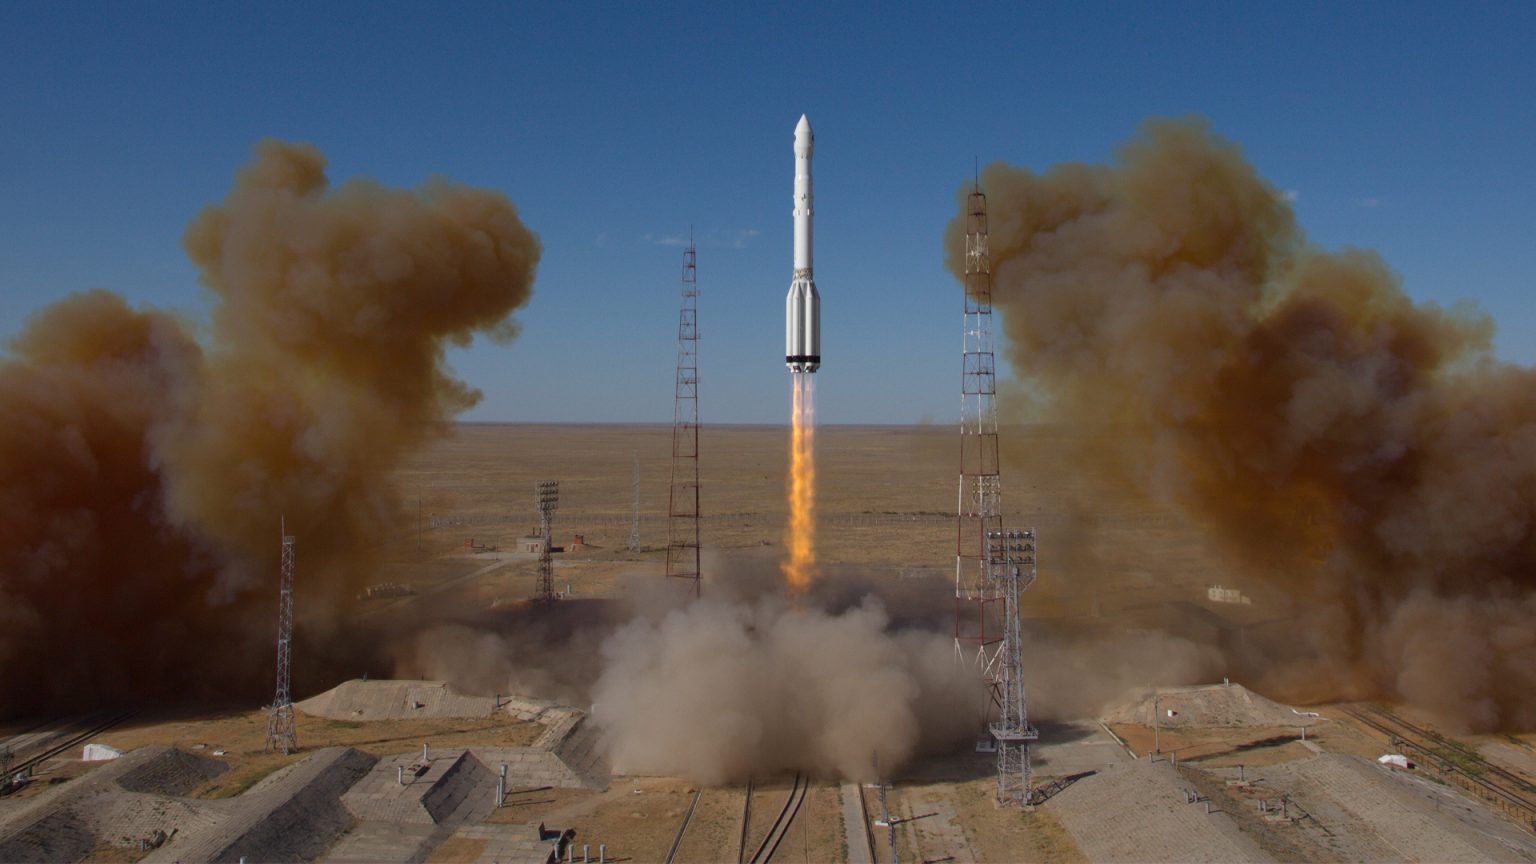 SRG is launched from Baikonur